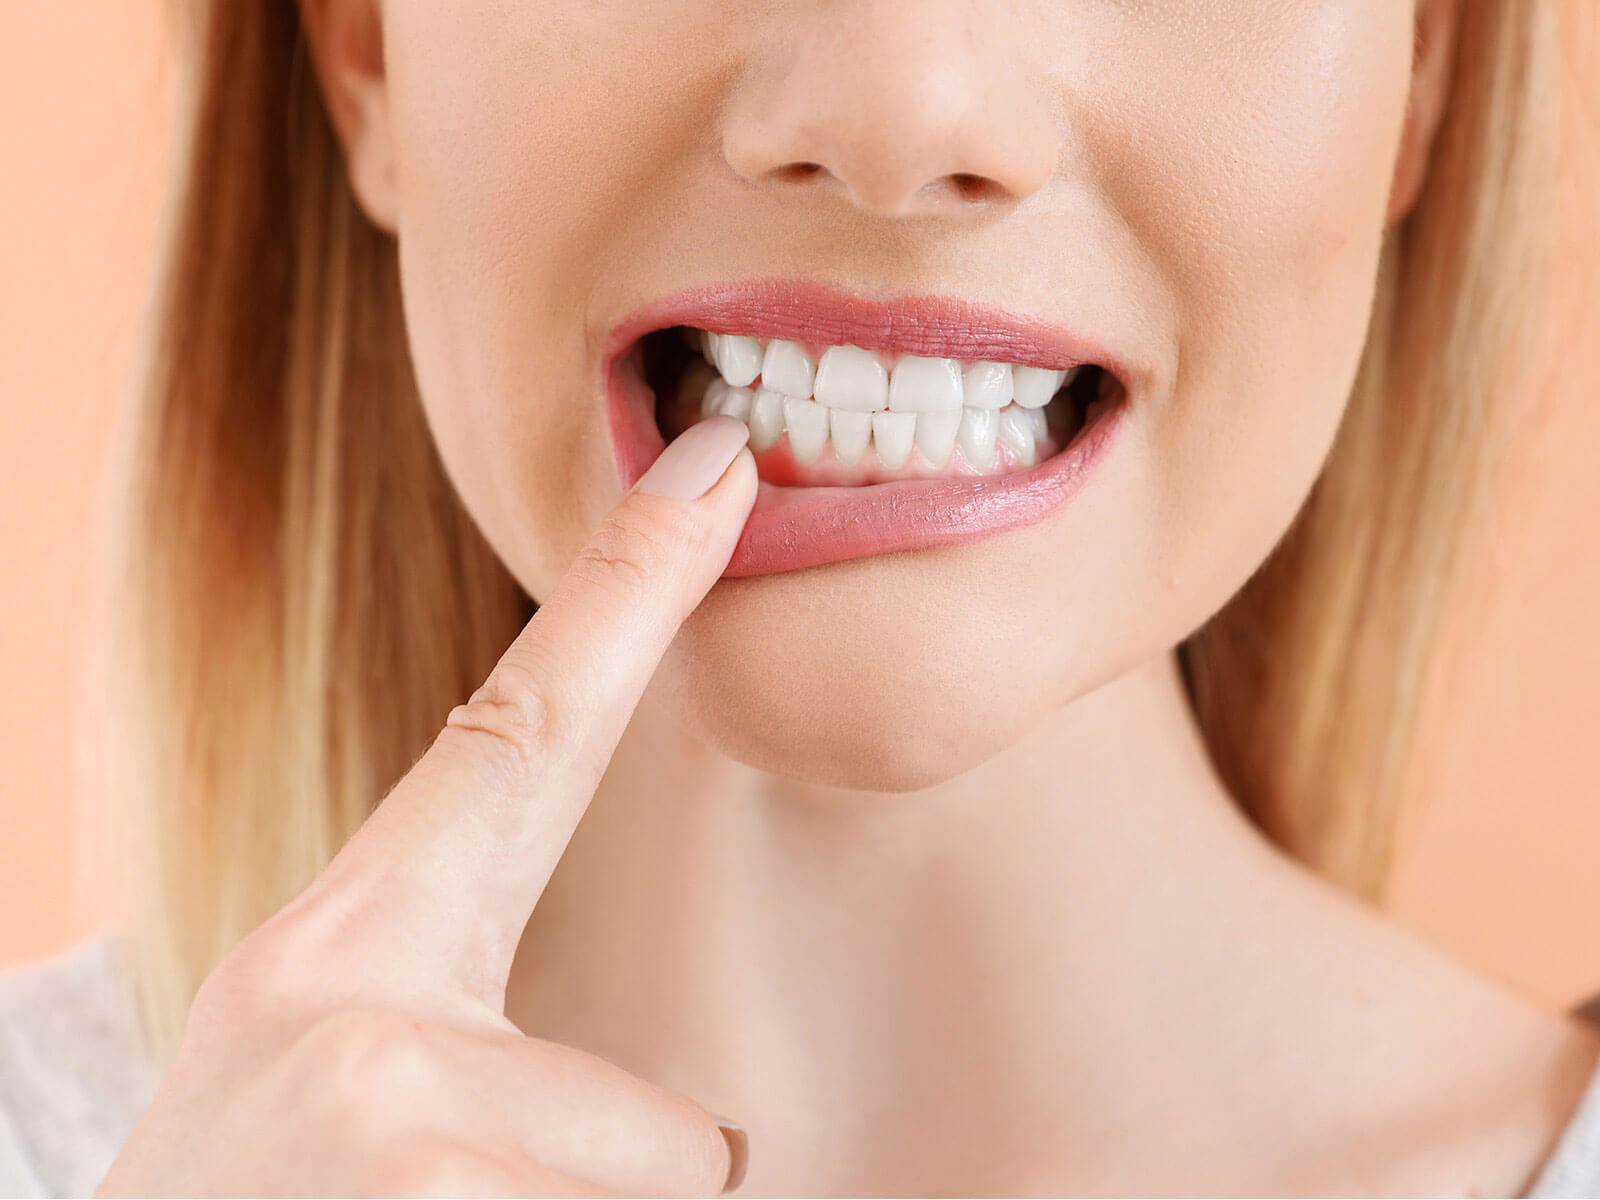 How can I prevent Enamel Loss And Damage?